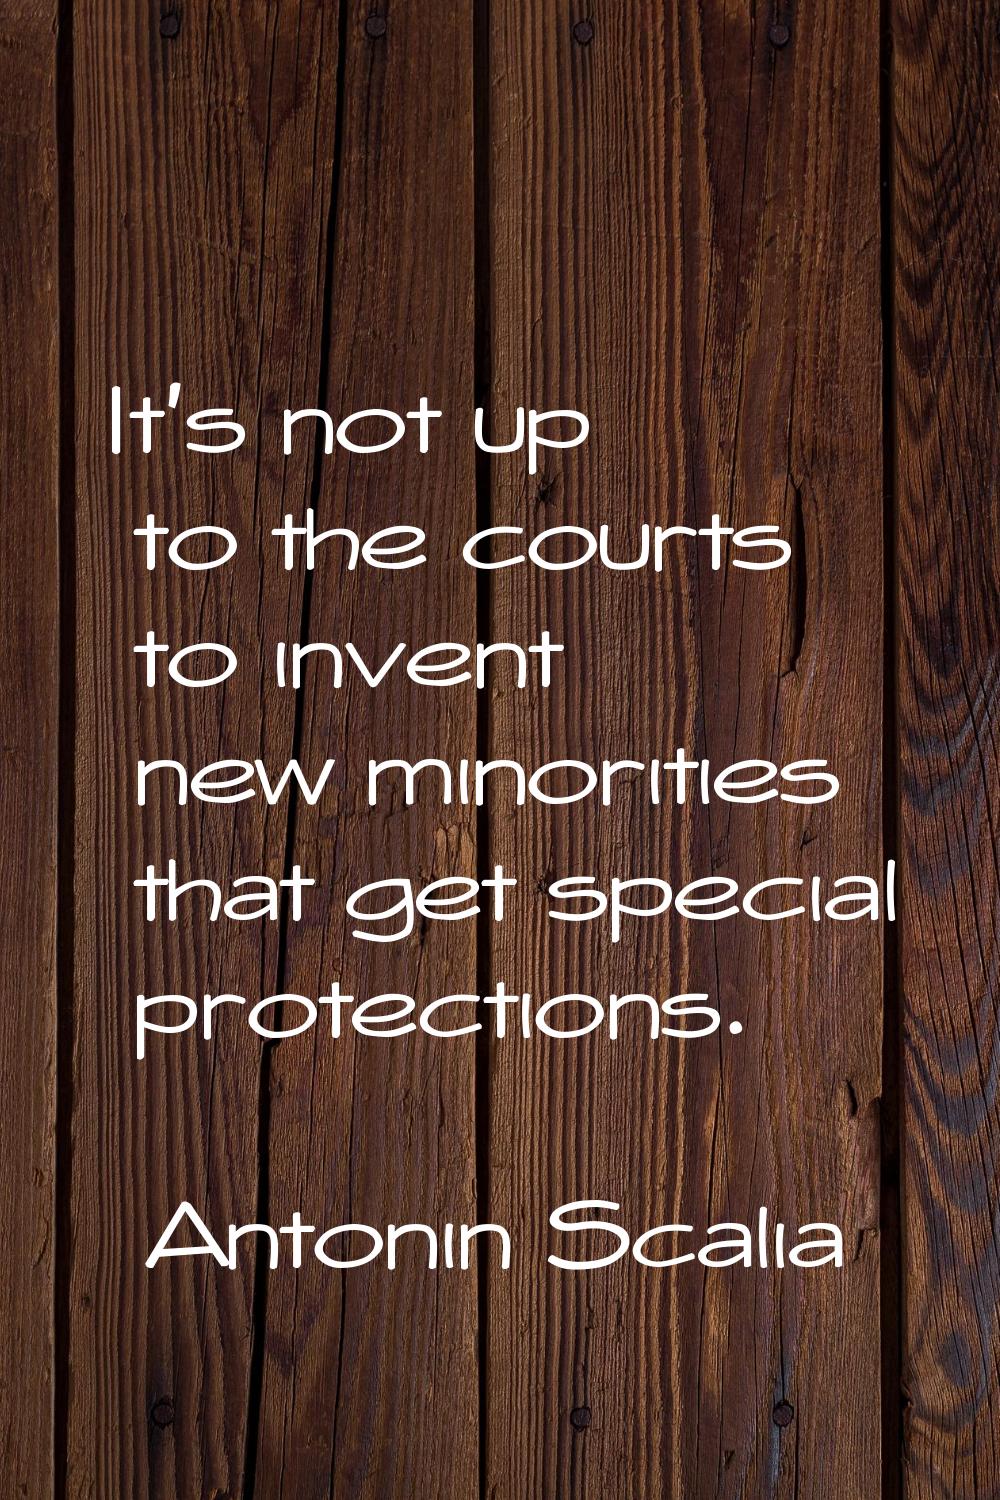 It's not up to the courts to invent new minorities that get special protections.